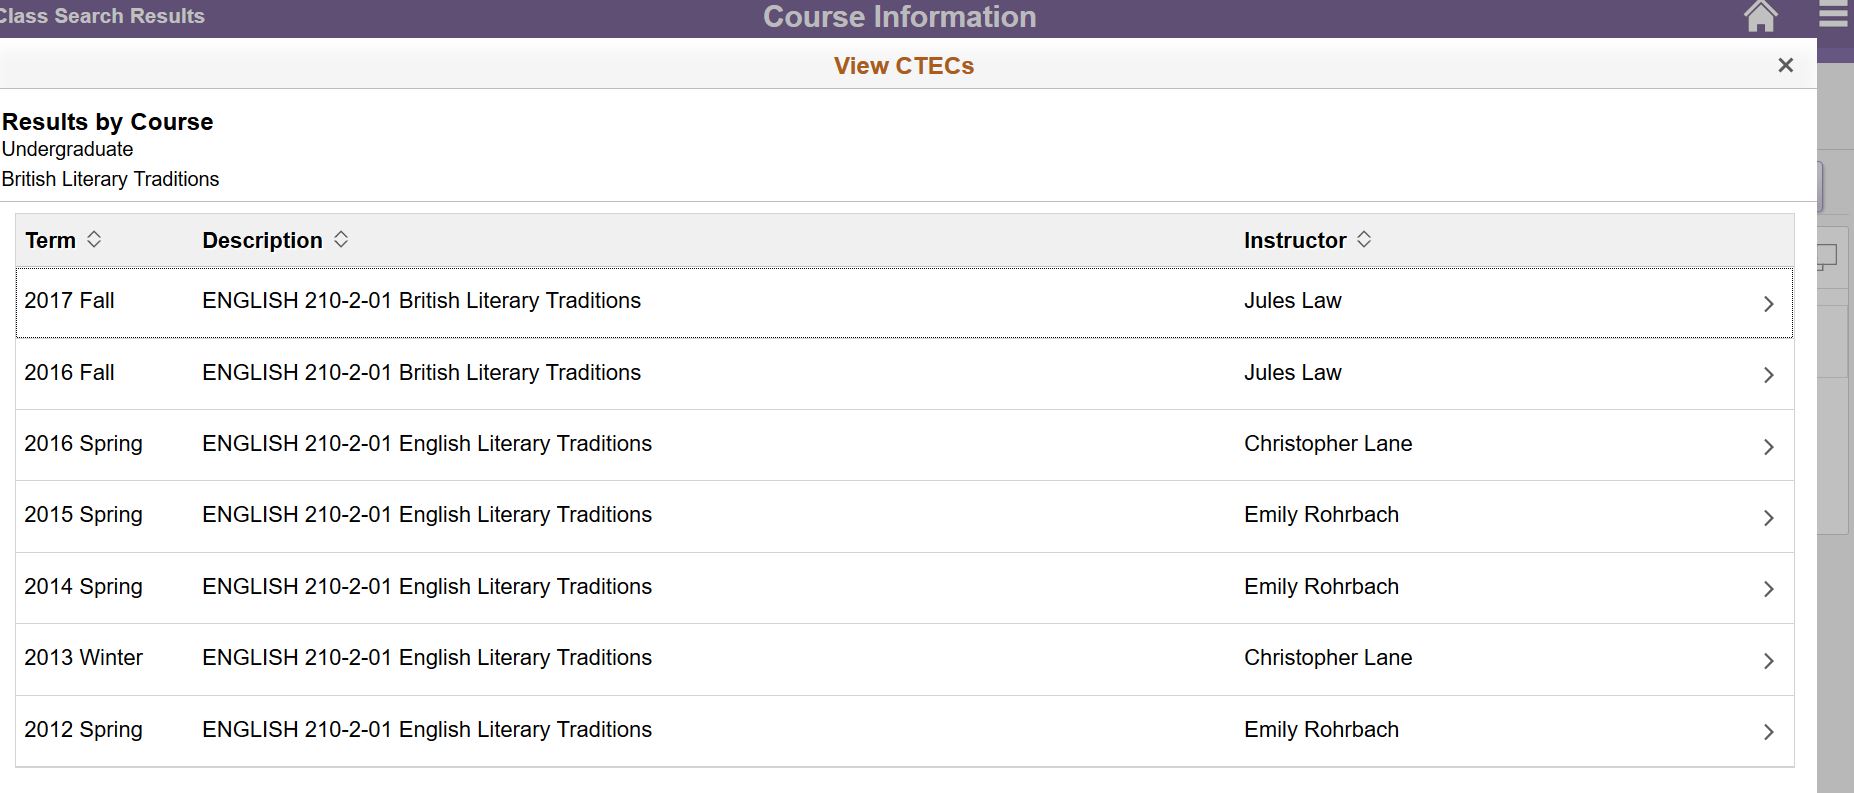 view ctecs in class search